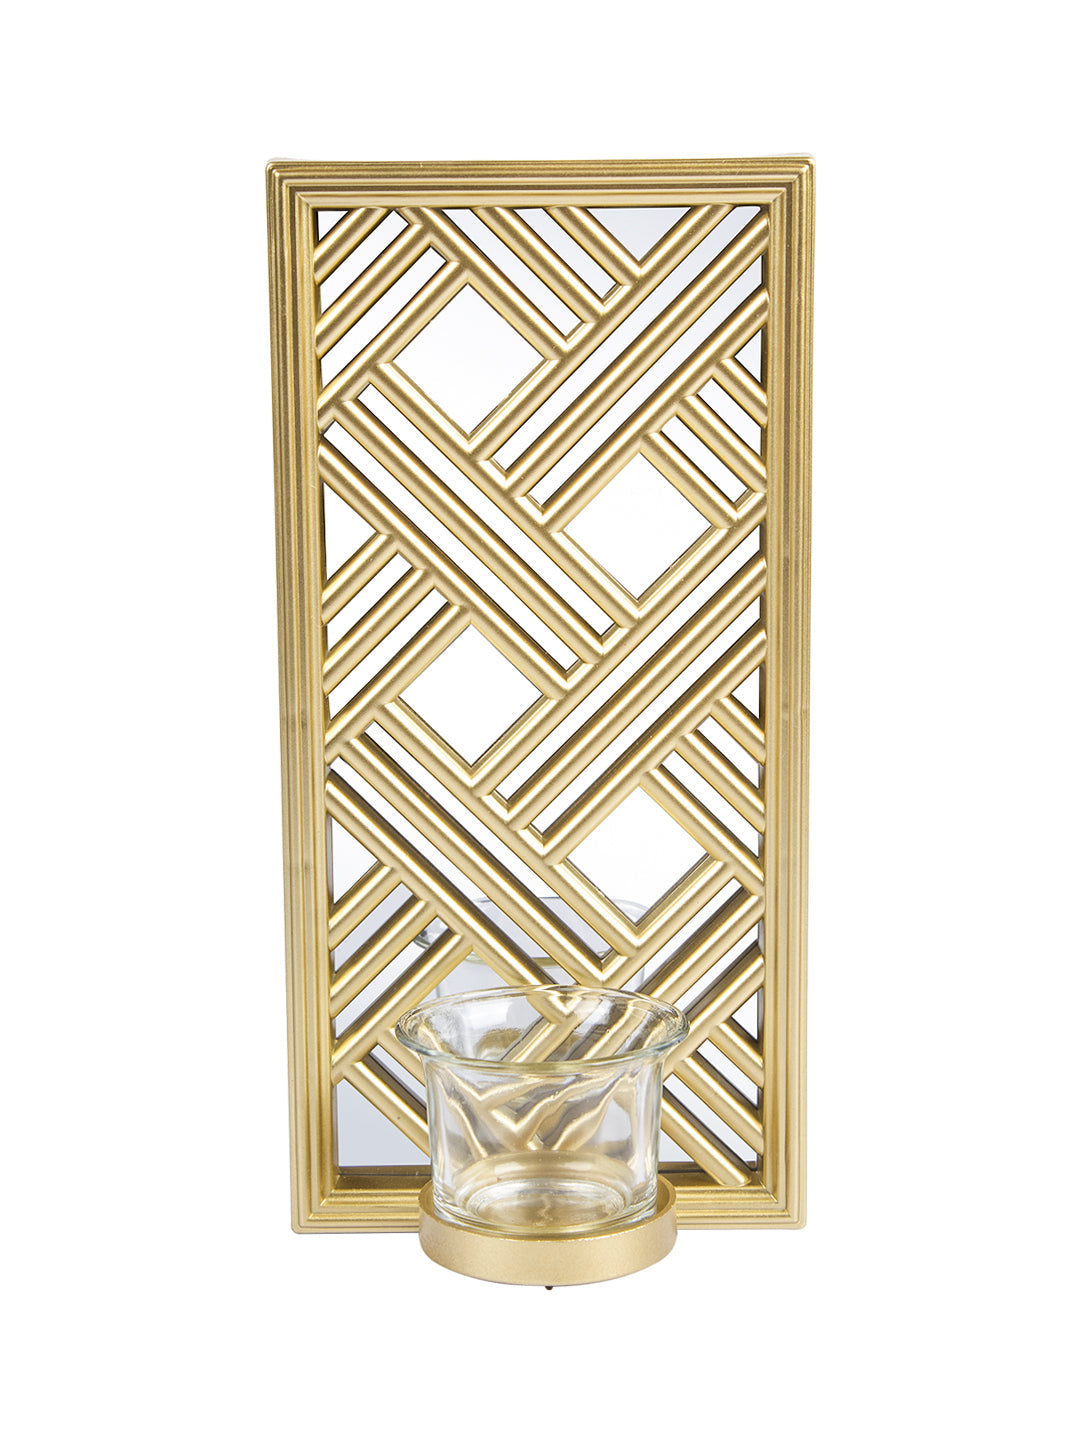 VON CASA Decorative Indoor Wall Sconce Candle Holders